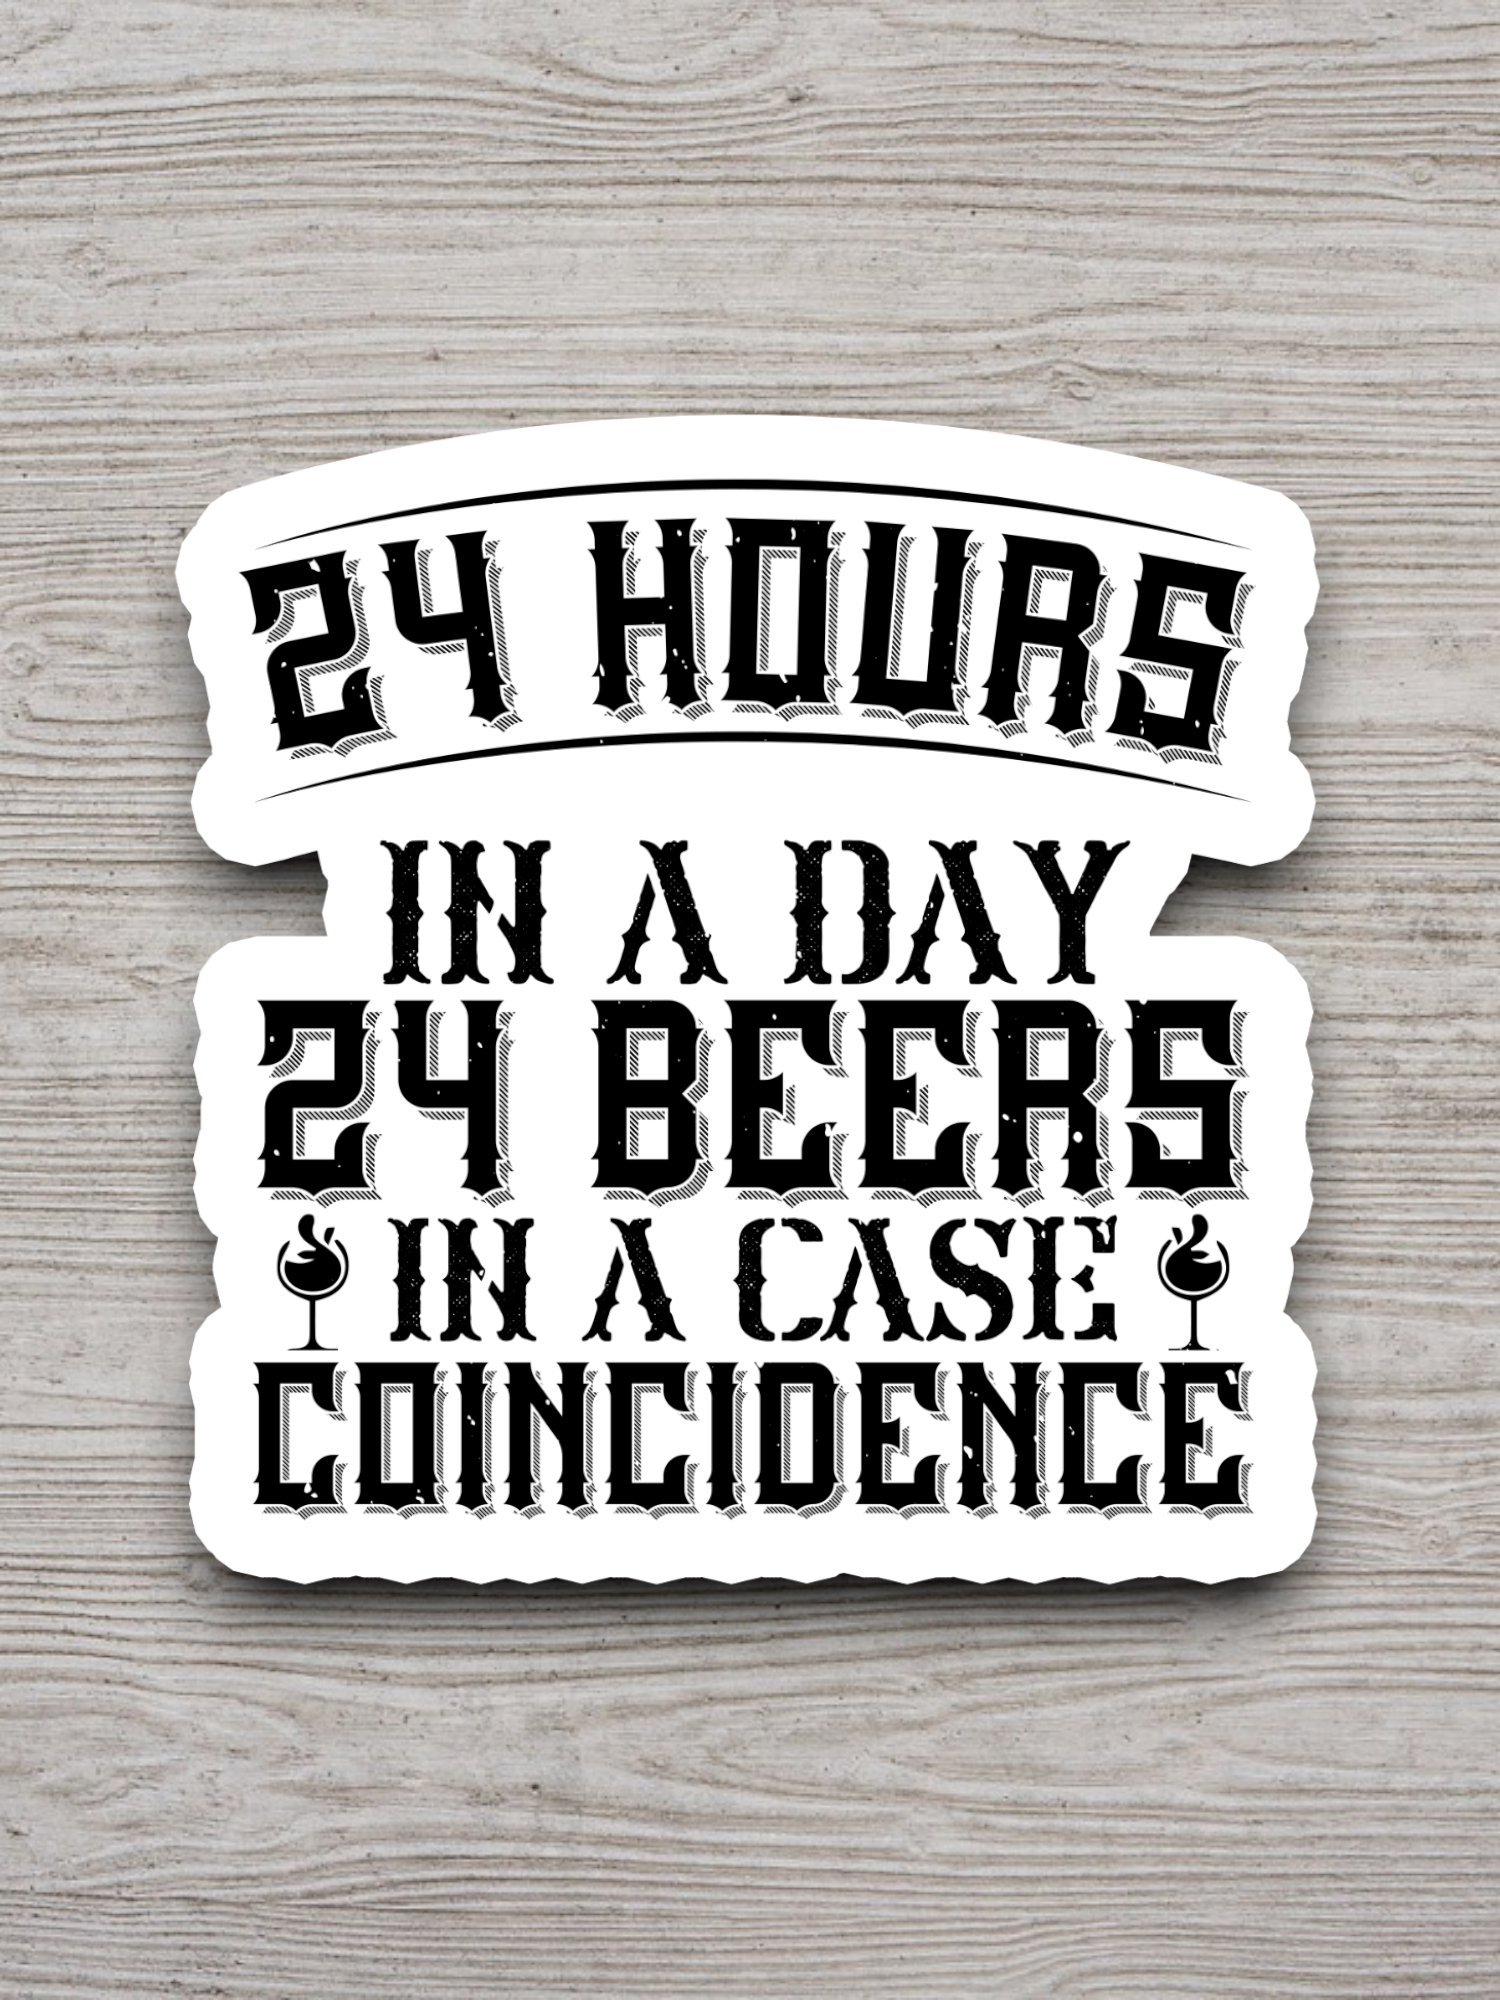 24 Hours in a Day 24 Beers in a Case Coincidence Sticker